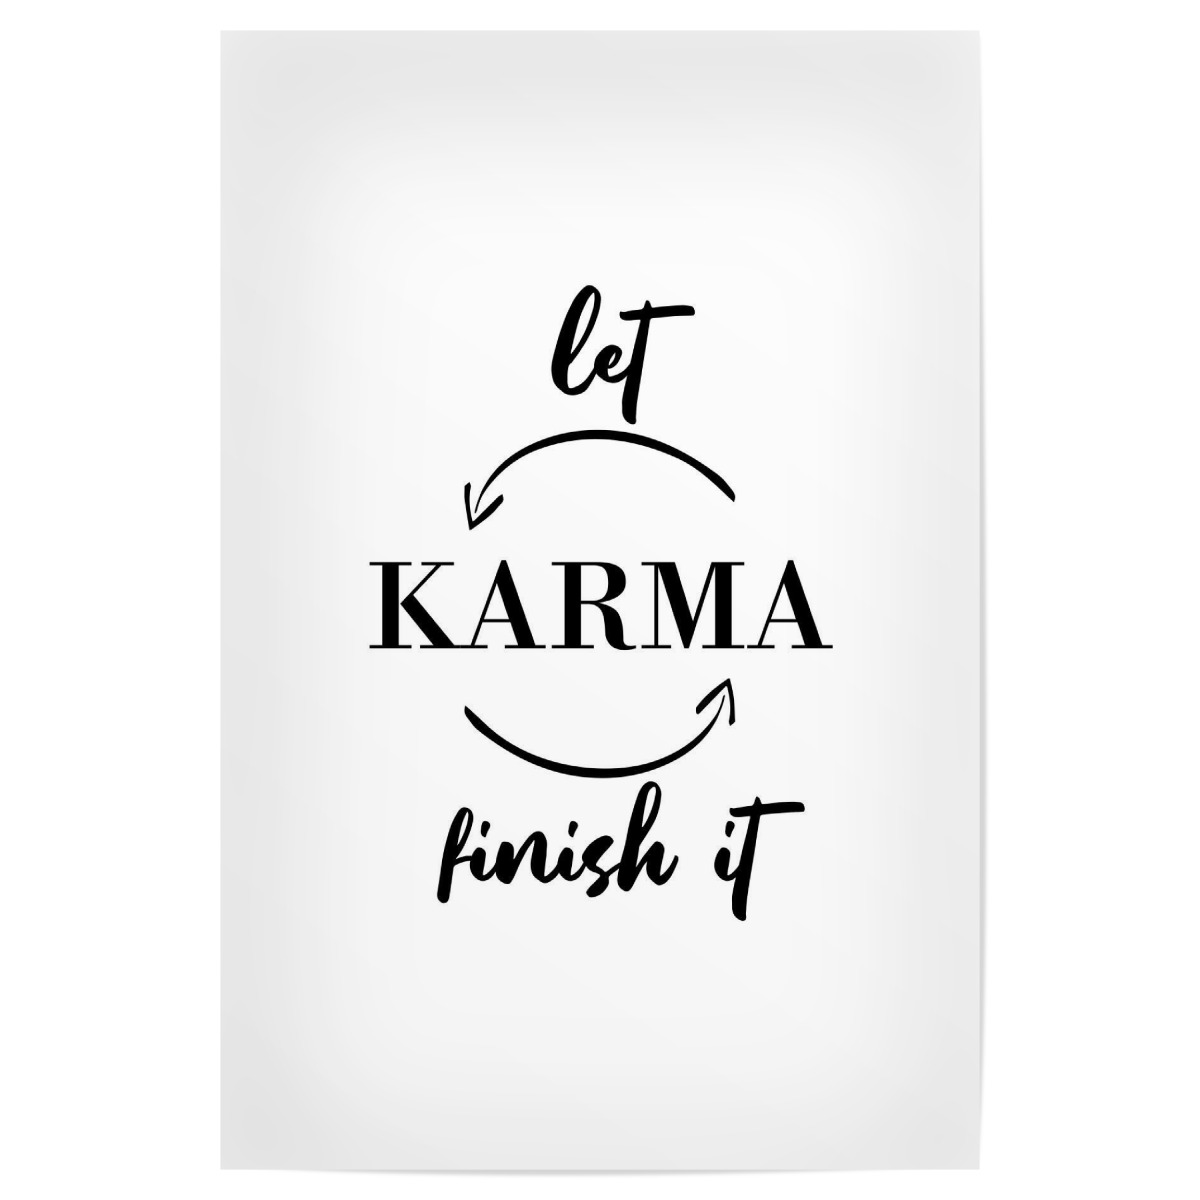 Karma What is